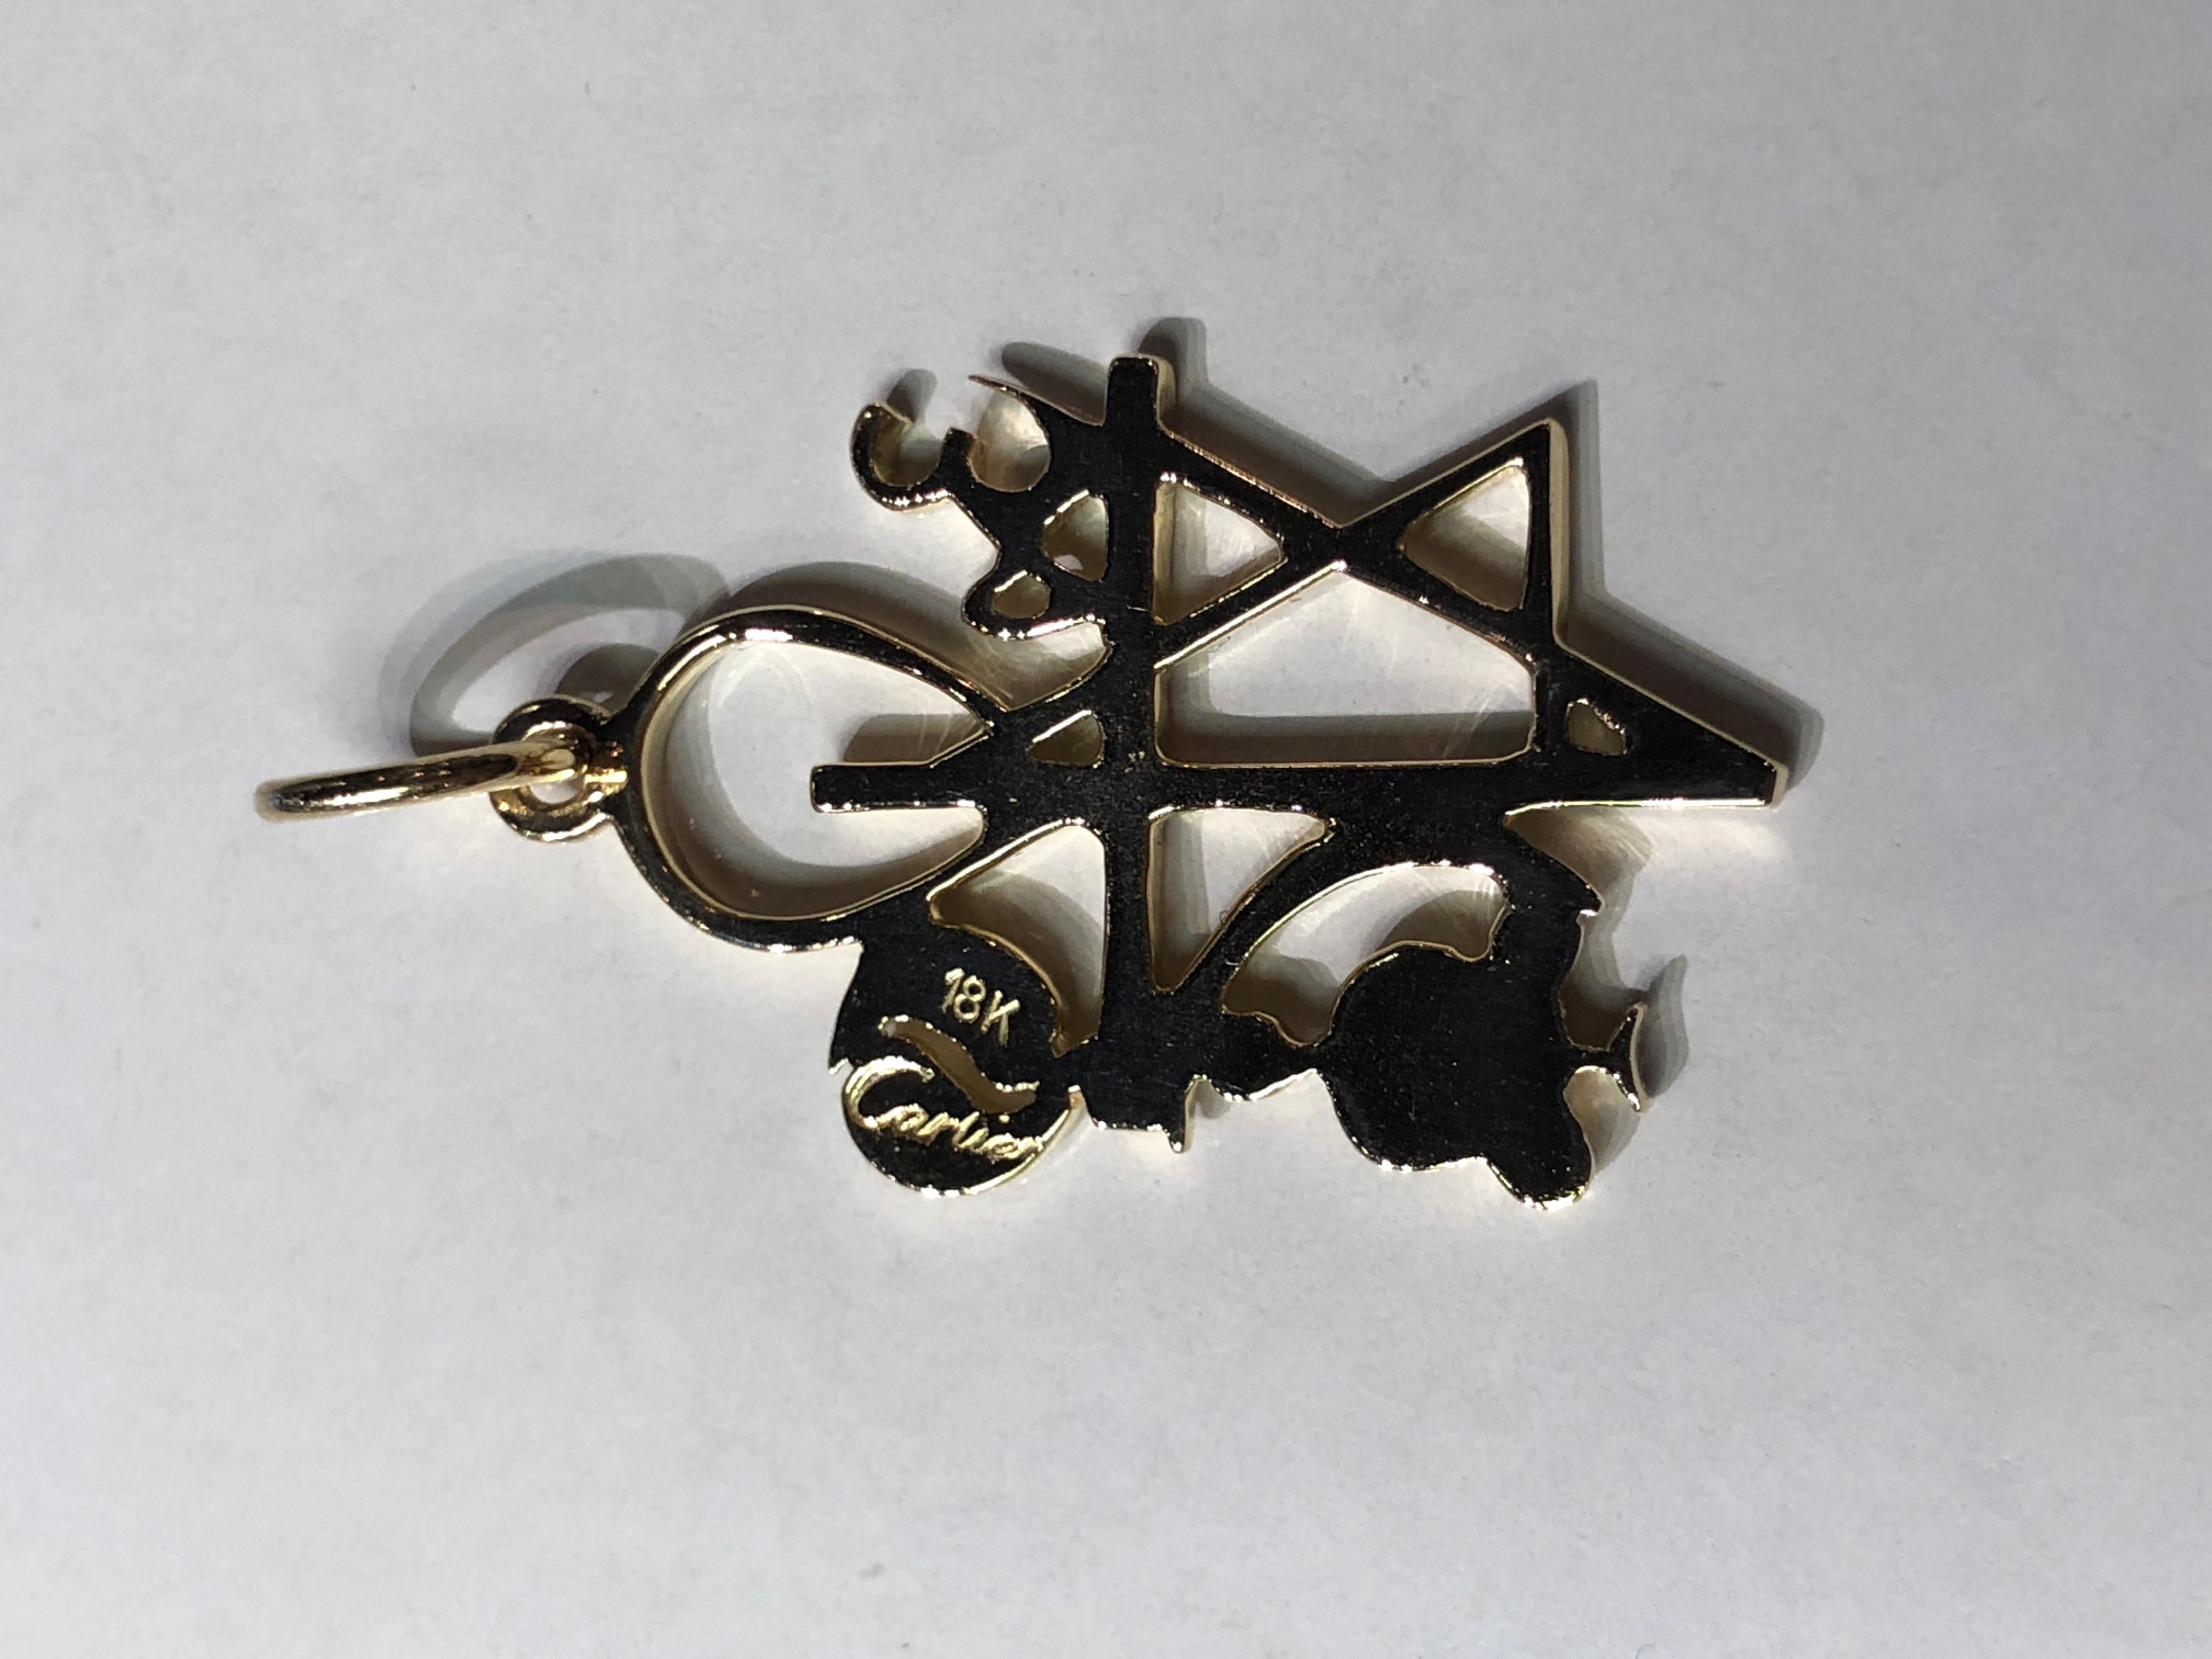 A unique abstract figural pendant/charm that represents the unity of all religions.  Made and signed by CARTIER.  18K shiny and matte finish yellow gold.  1 1/4